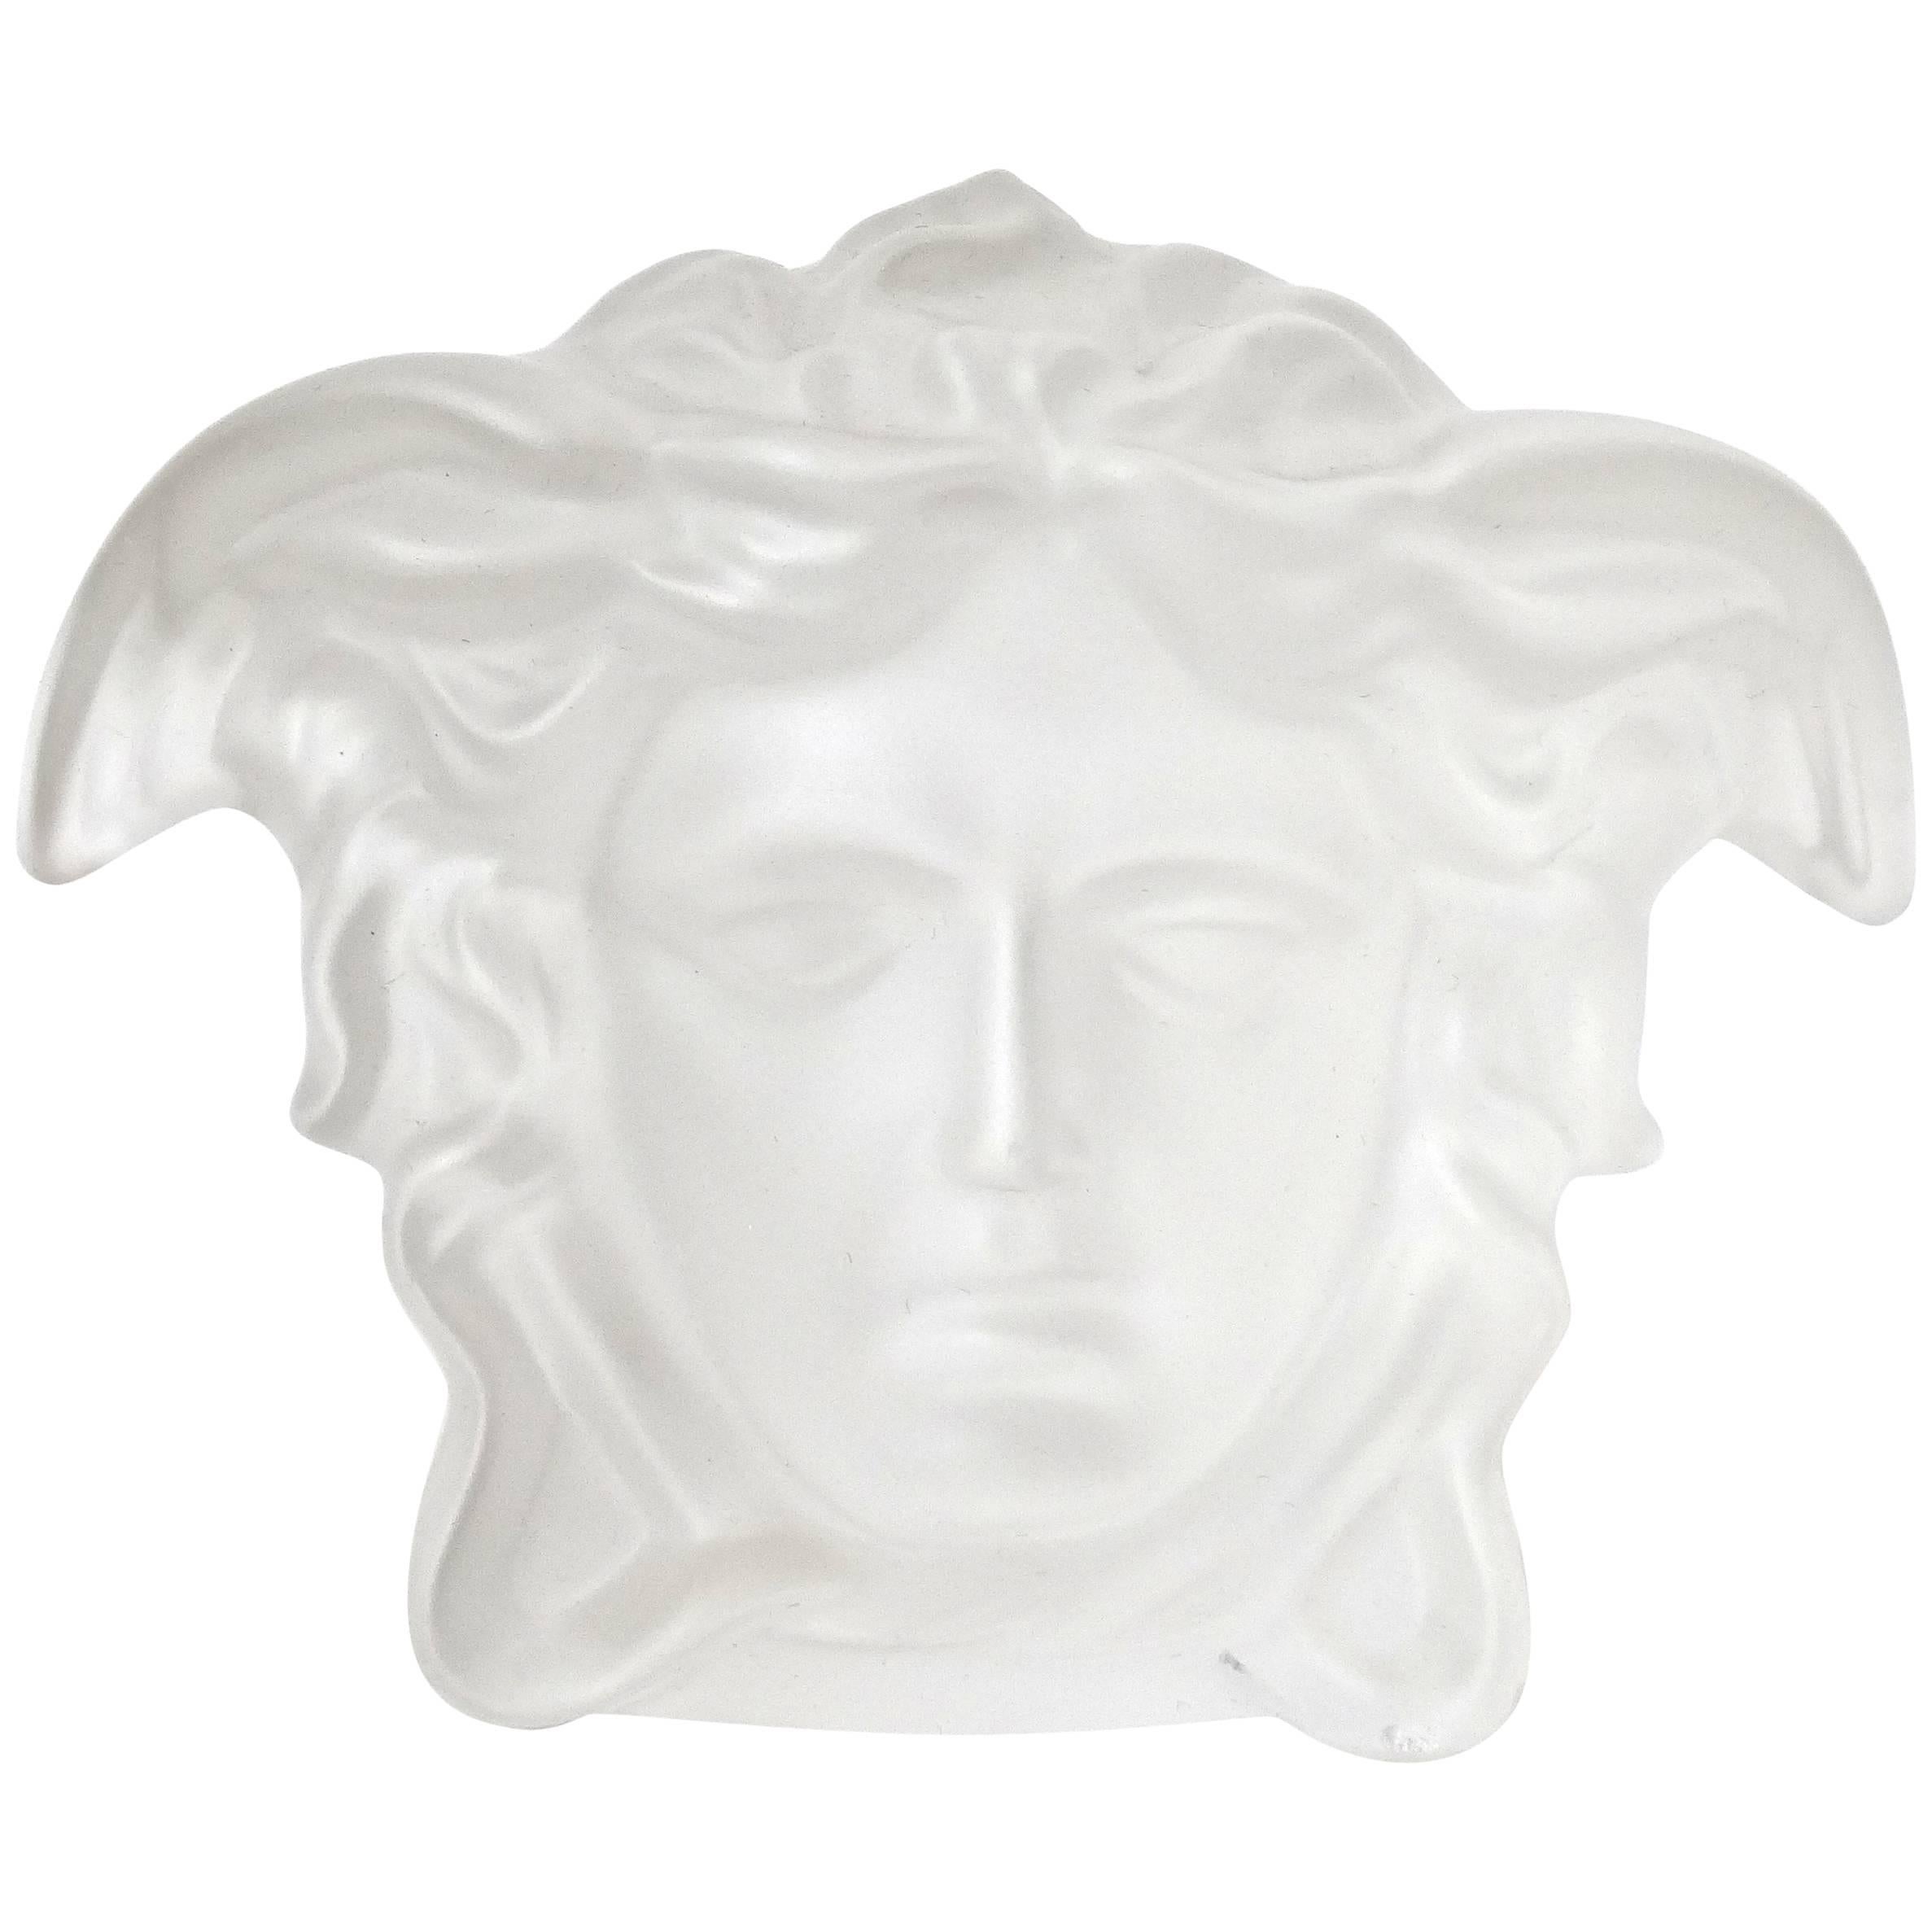 Versace Medusa Head Frosted Paperweight